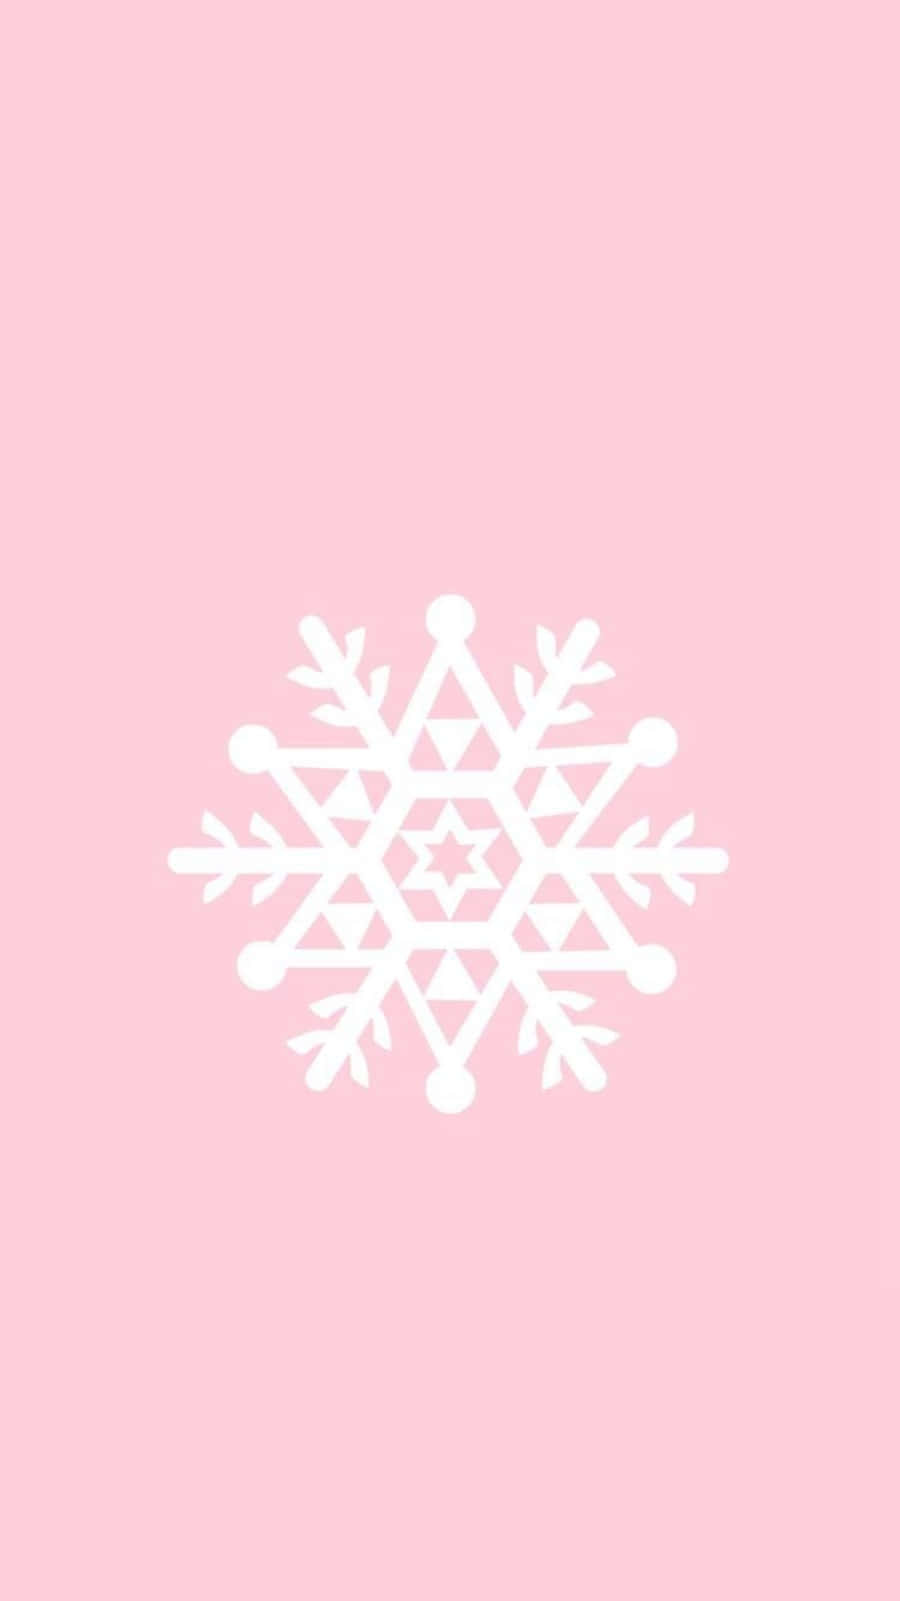 A Snowflake On A Pink Background Wallpaper